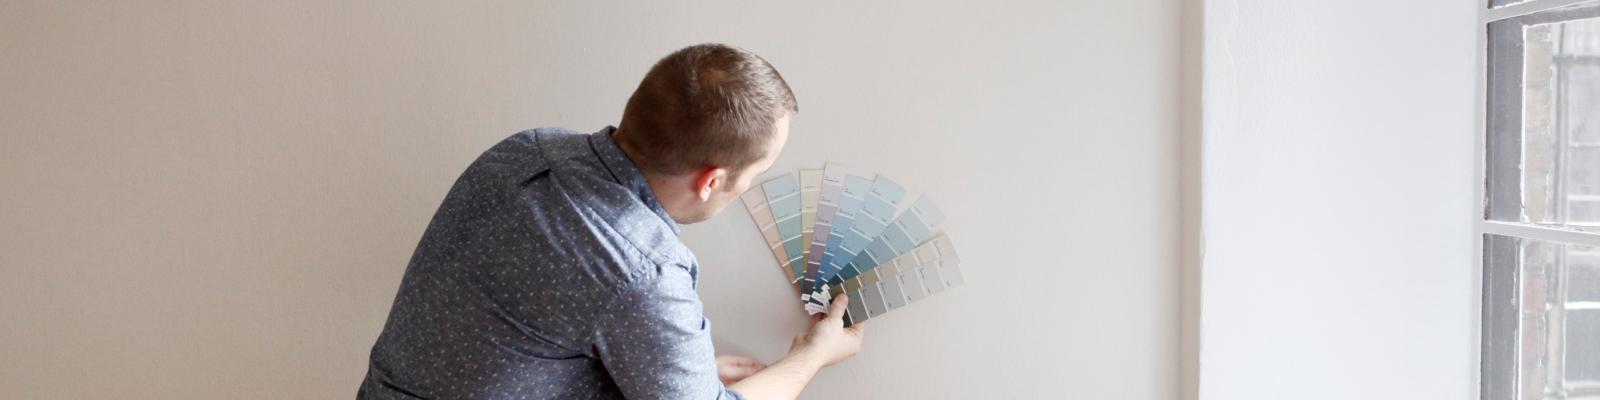 Man holds up paint samples against a beige wall.